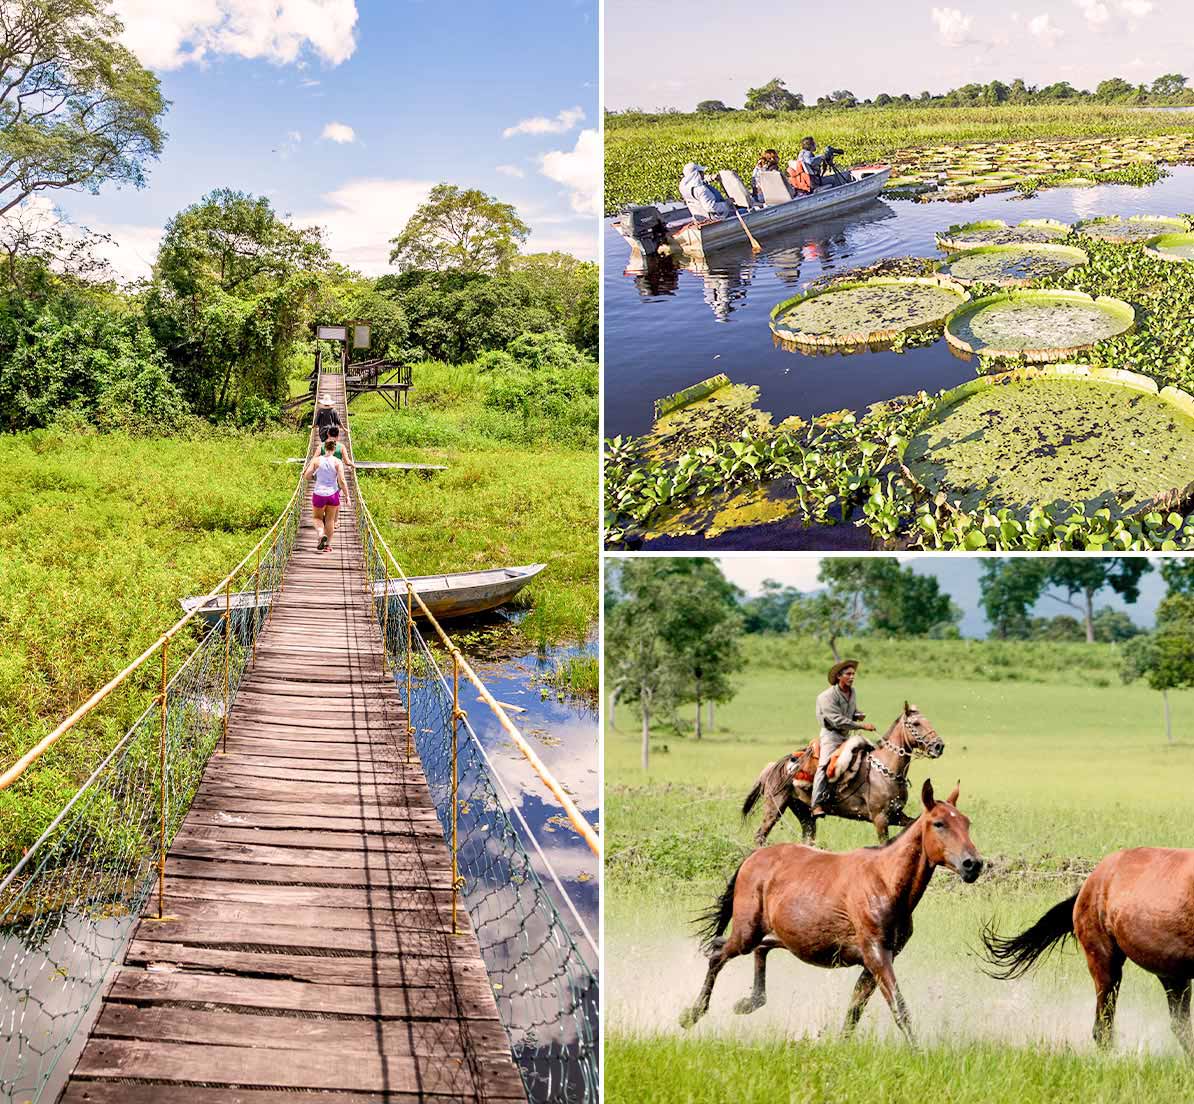 A collage of a wooden bridge, a boat navigating a pond, and a man on horseback in the Pantanal.